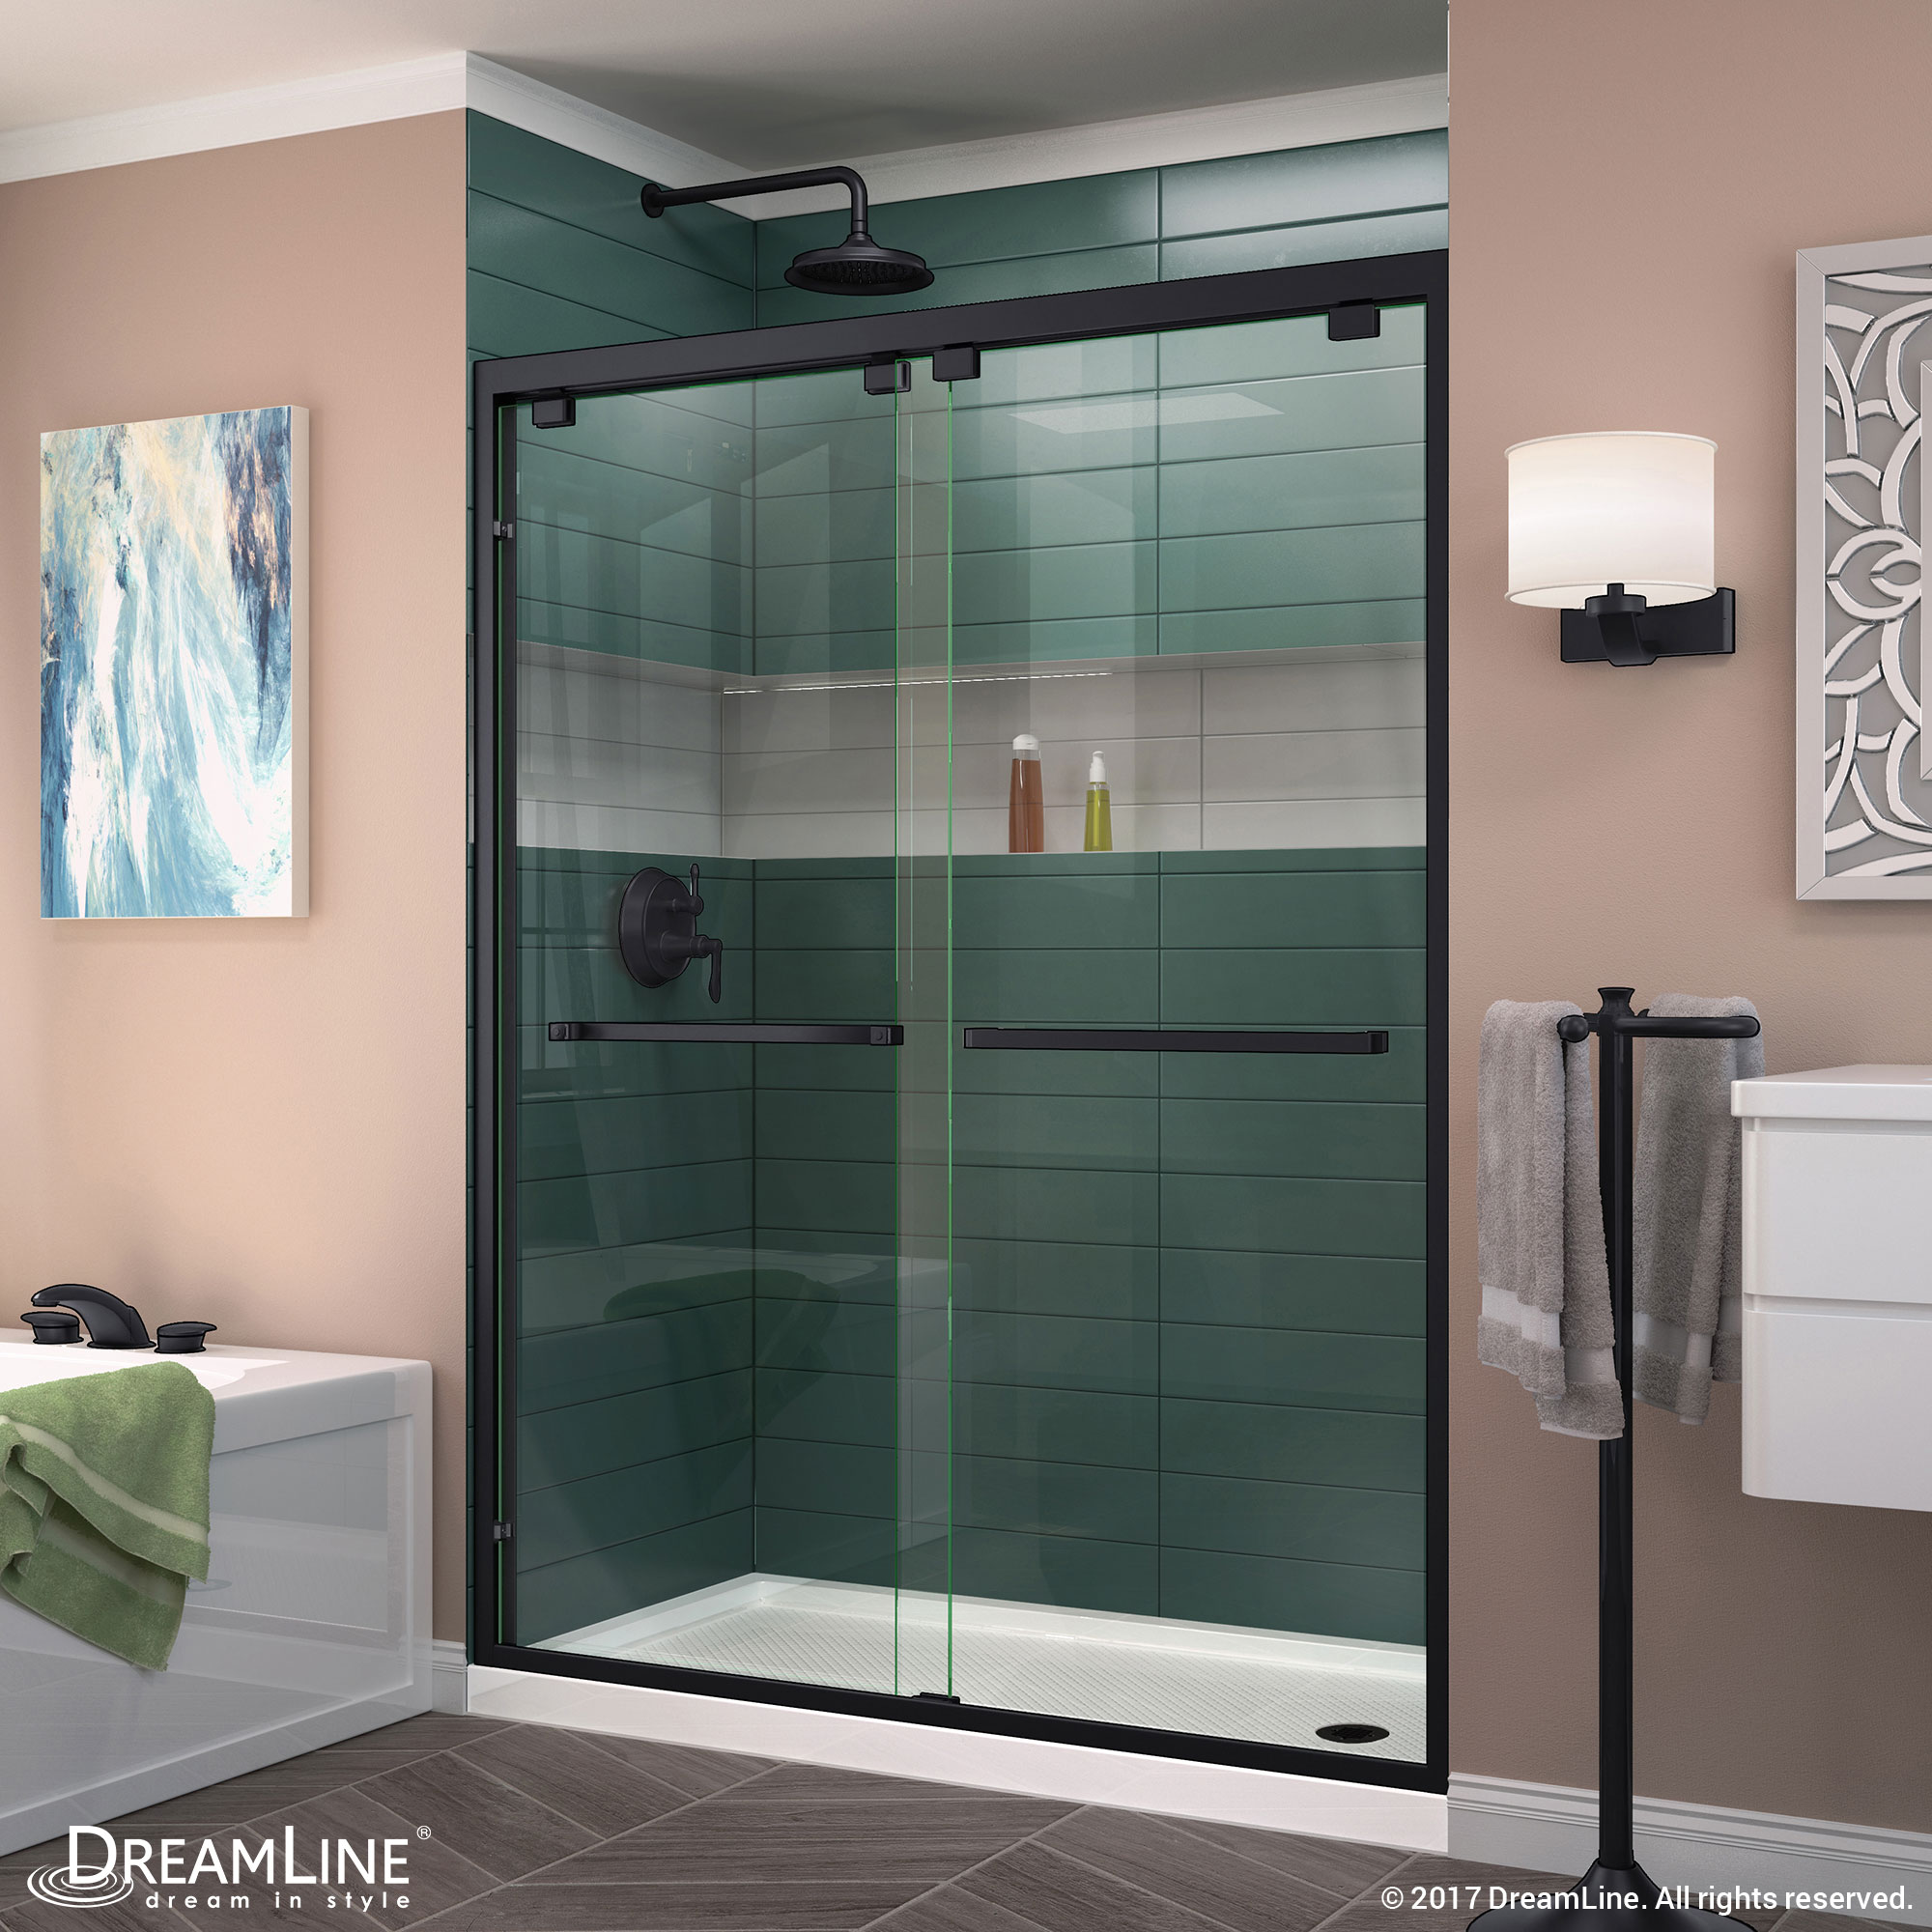 DreamLine Encore 36 in. D x 60 in. W x 78 3/4 in. H Bypass Shower Door in Oil Rubbed Bronze and Right Drain White Base Kit